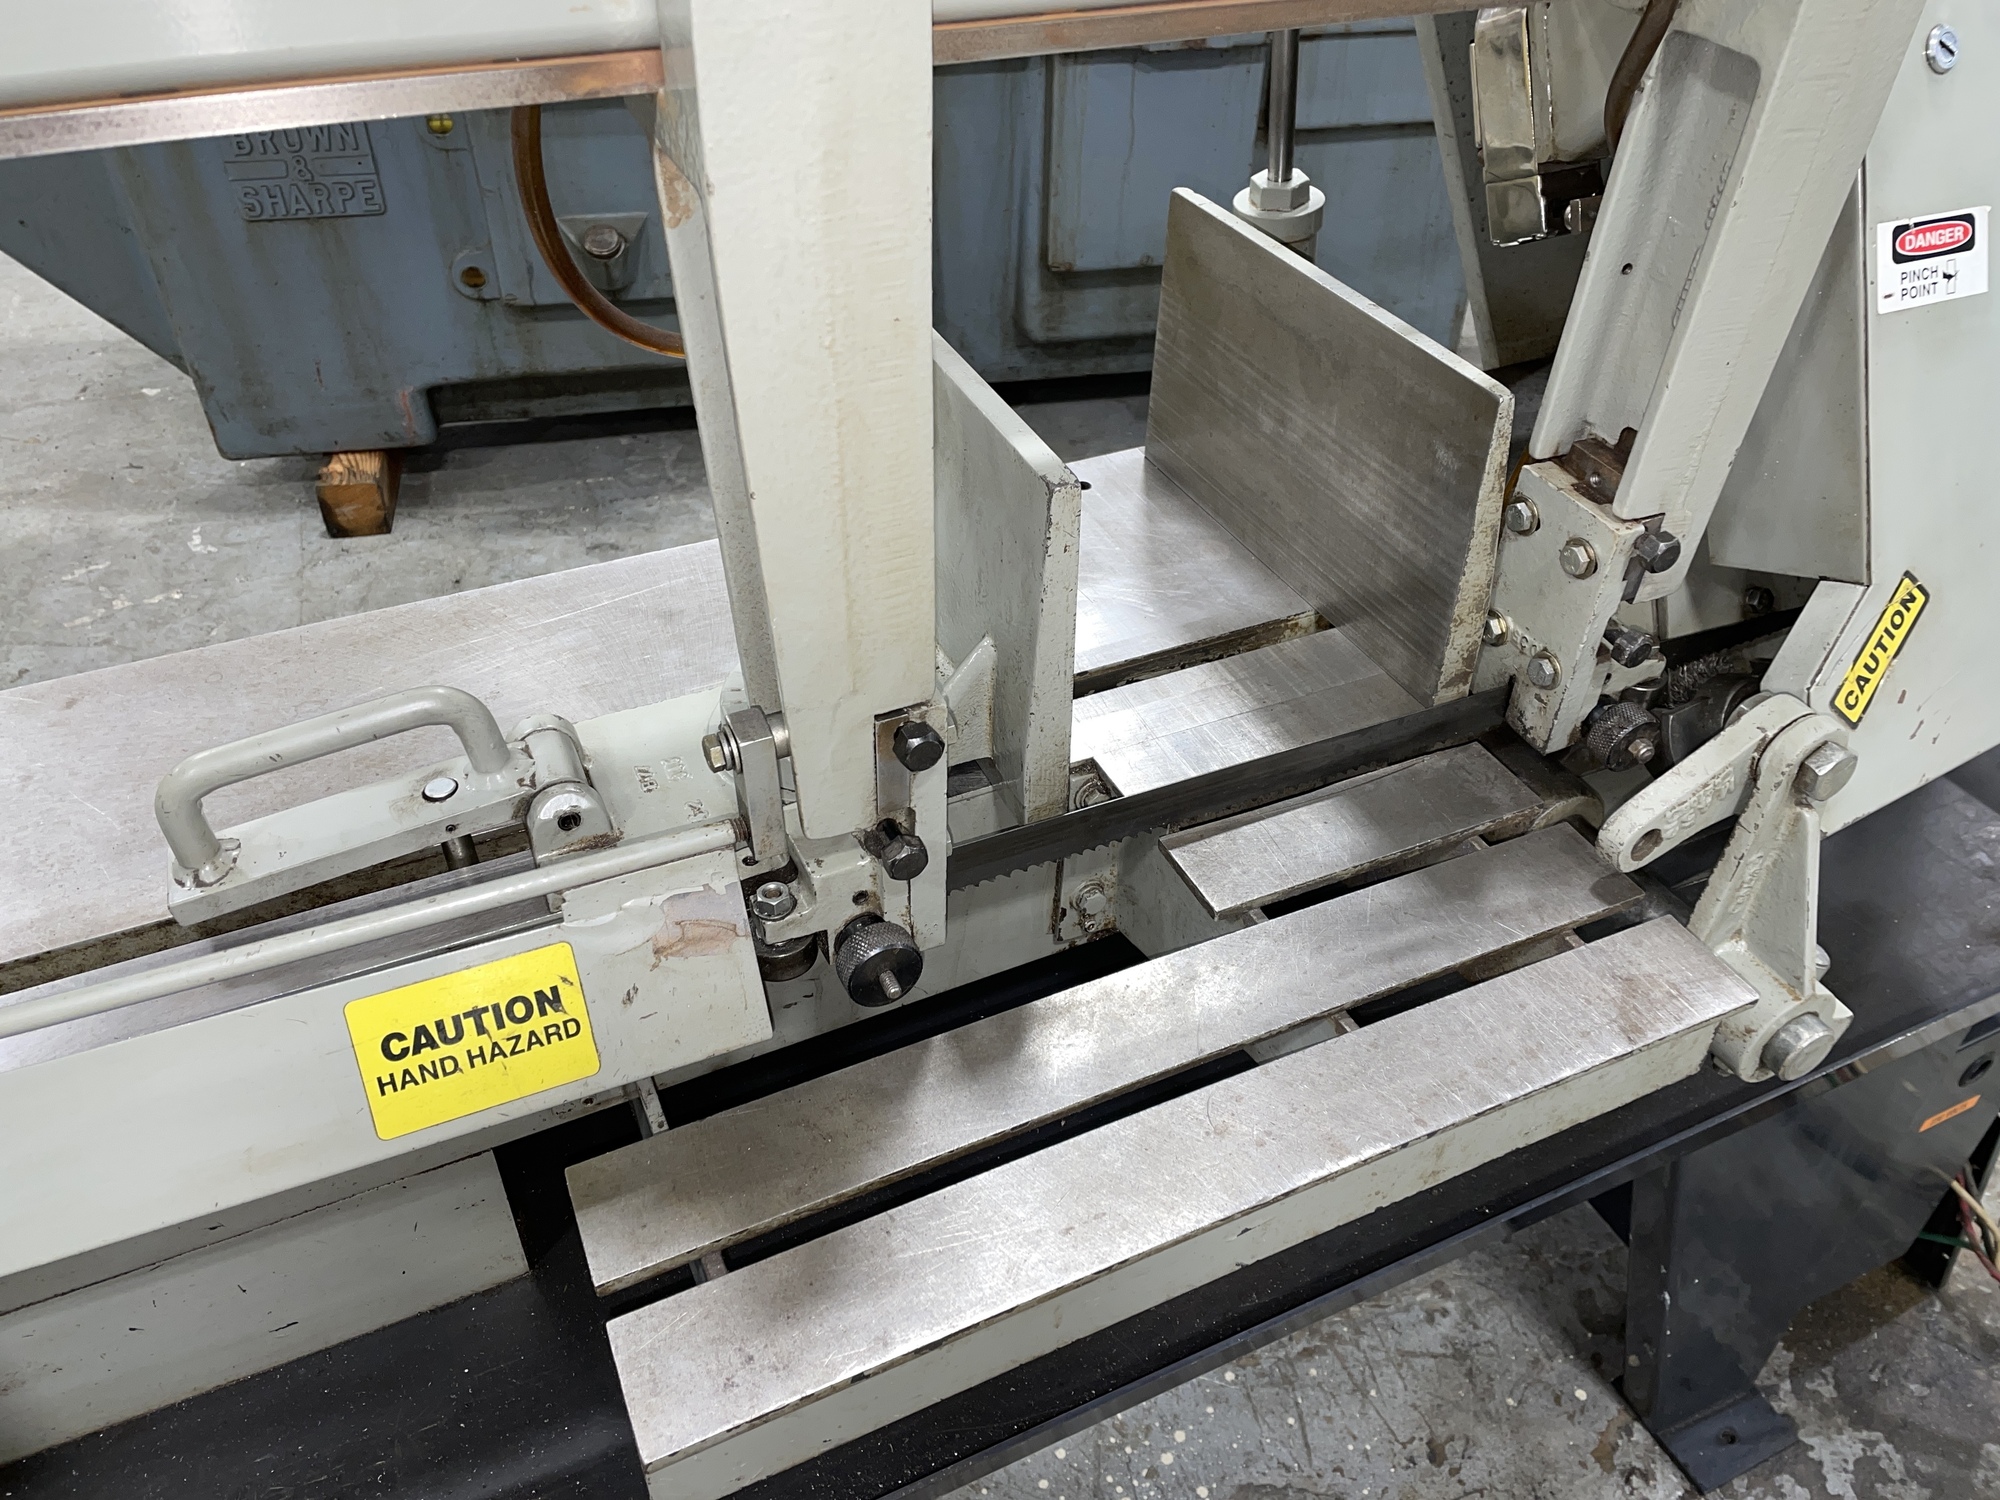 2011 WELLSAW 1318 Horizontal Band Saws | New England Industrial Machinery